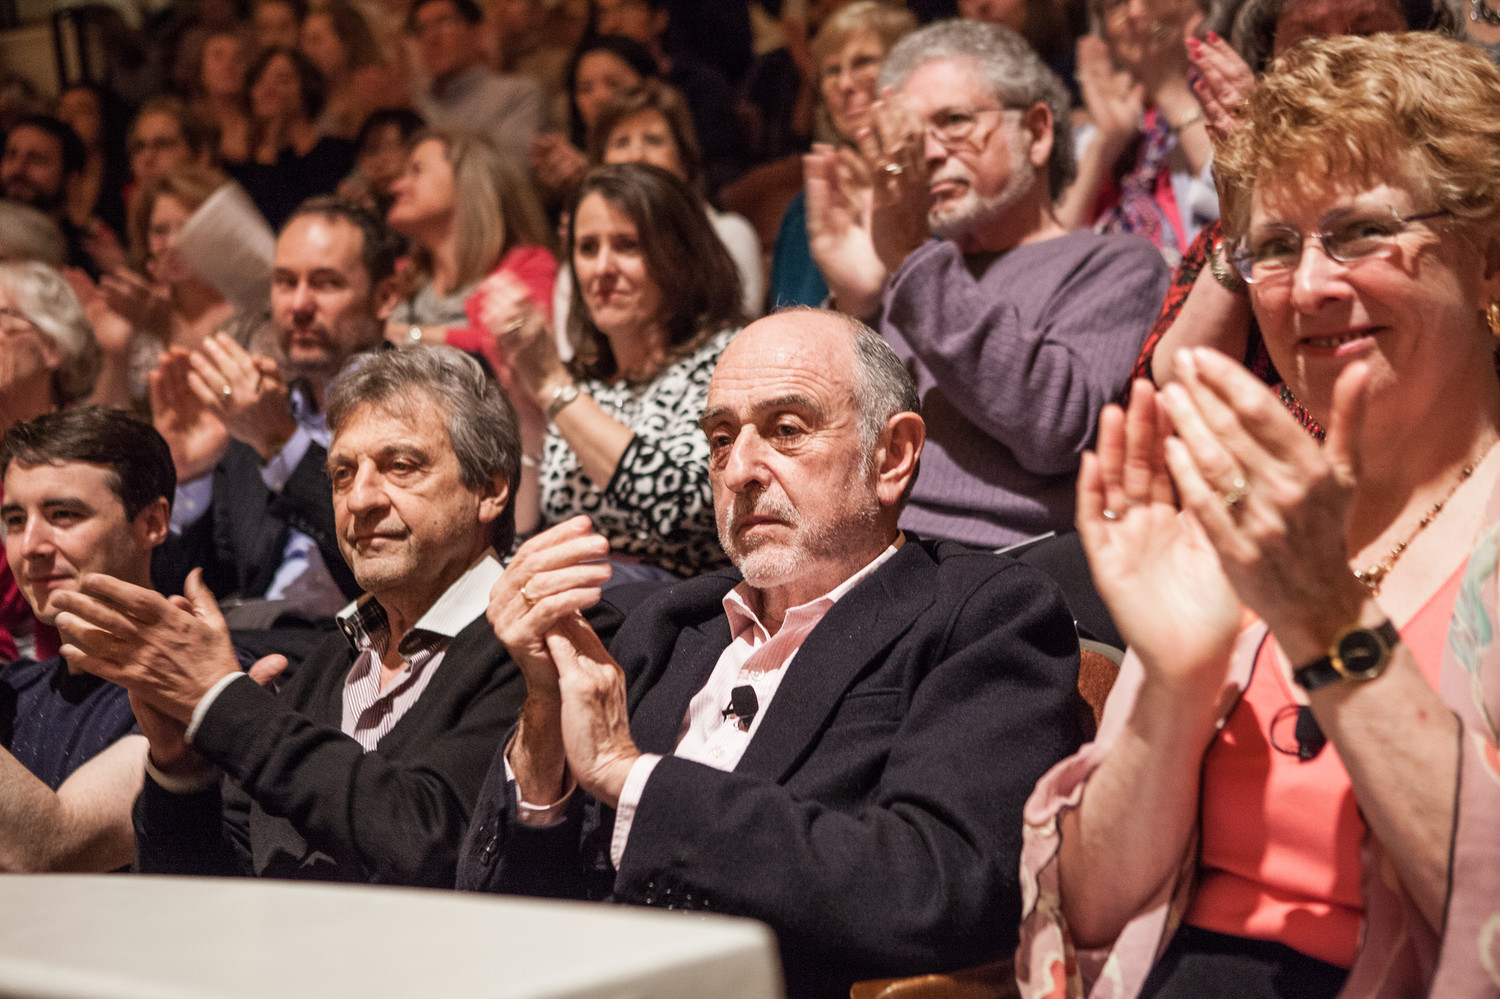 Alain Boublil and Claude-Michel Schönberg enjoy the musical opening by the University Singers, directed by Associate Professor Michael Slon, for An Evening with Schönberg and Boublil.